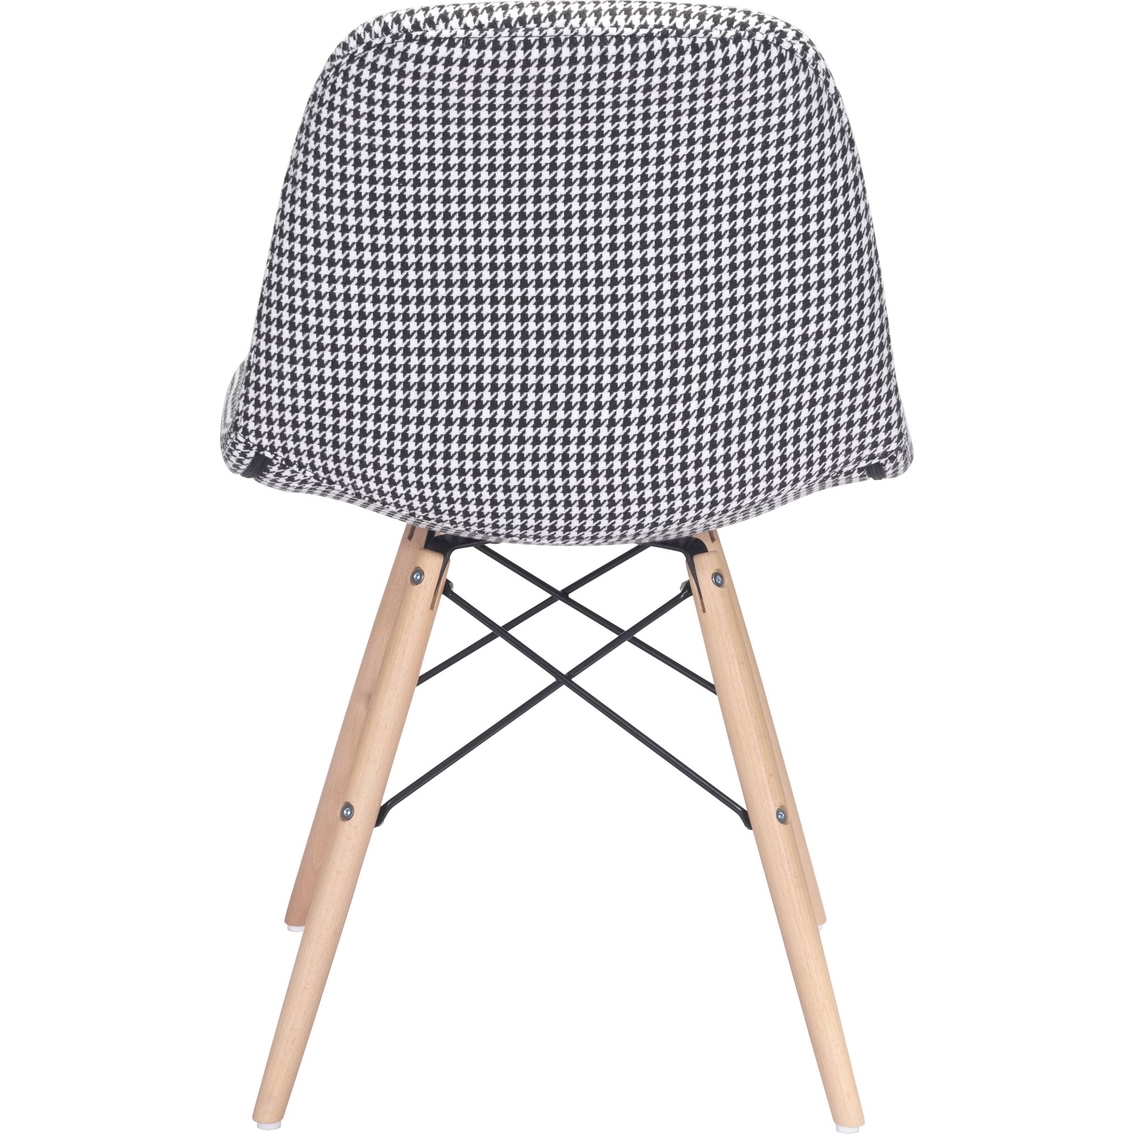 Zuo Modern Sappy Dining Chair Houndstooth - Image 3 of 4